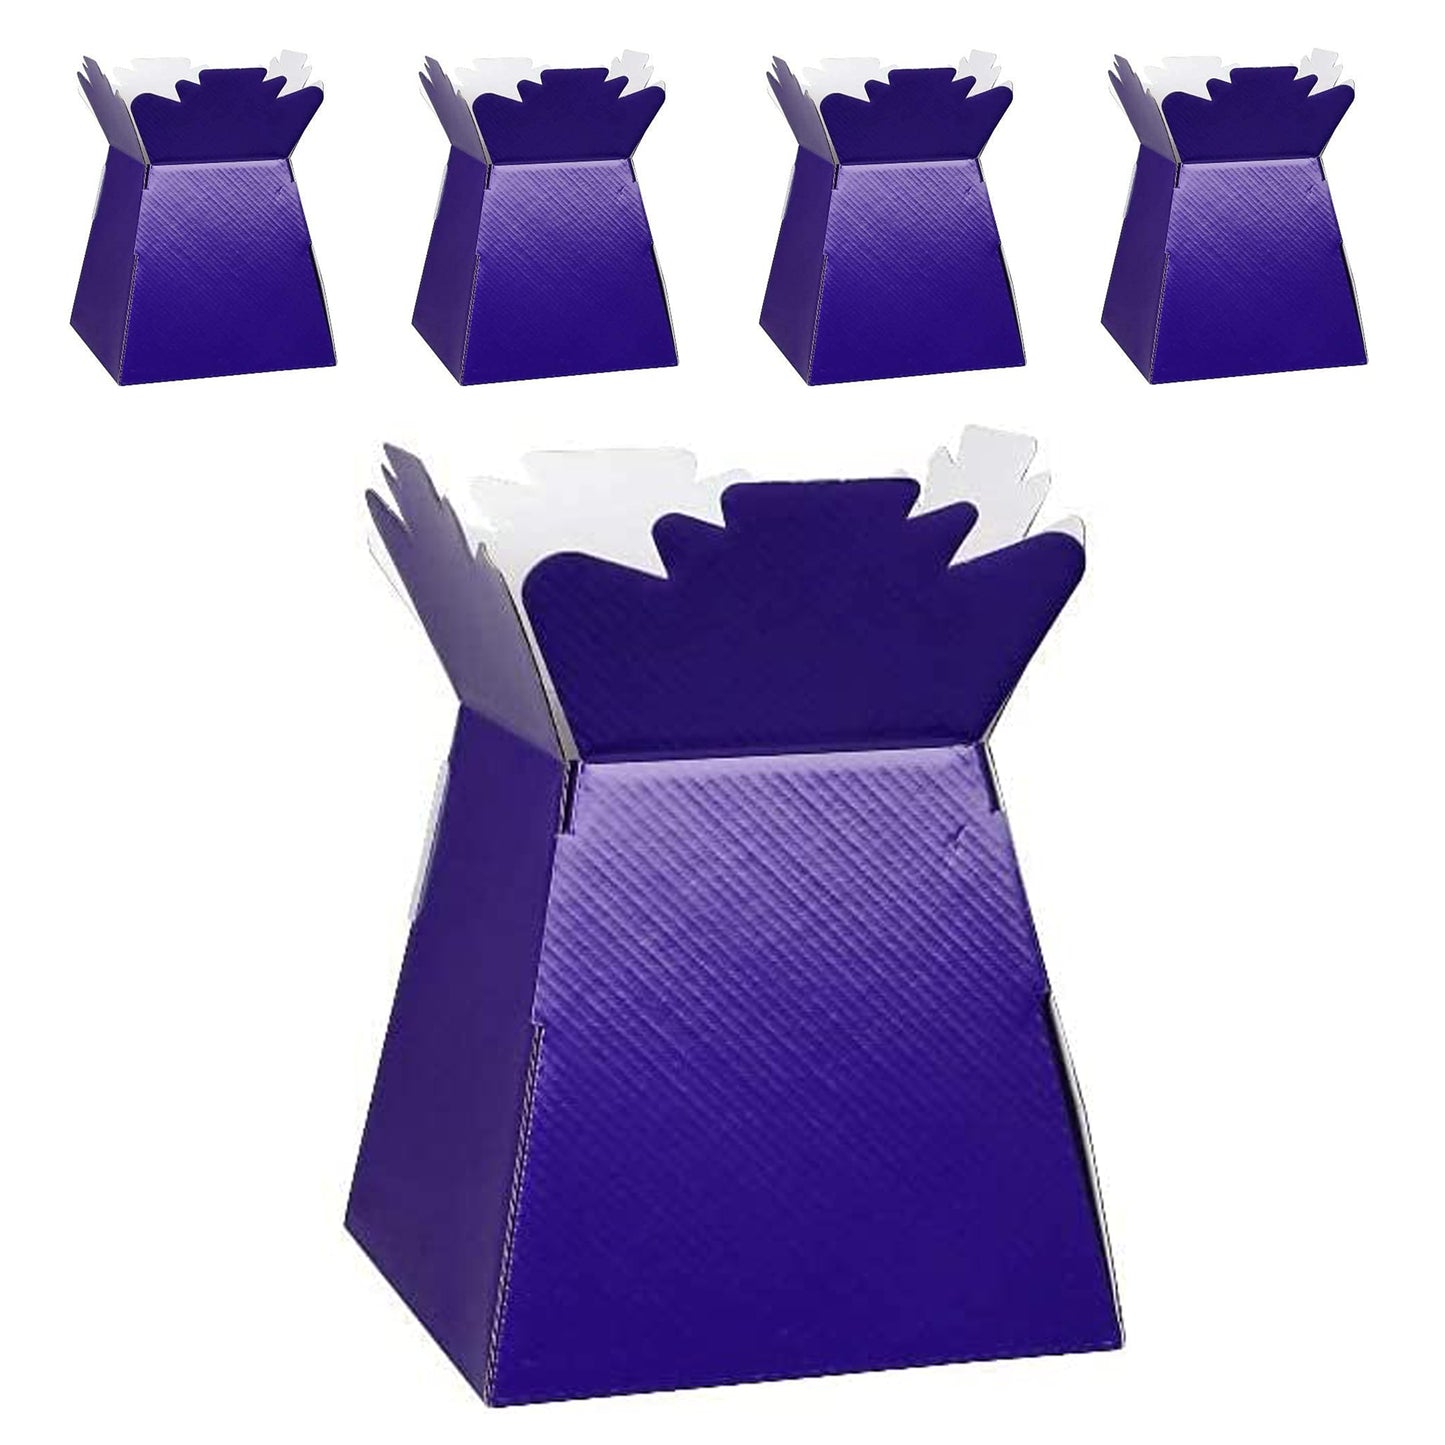 Flower Bouquet Boxes – Pack of 5